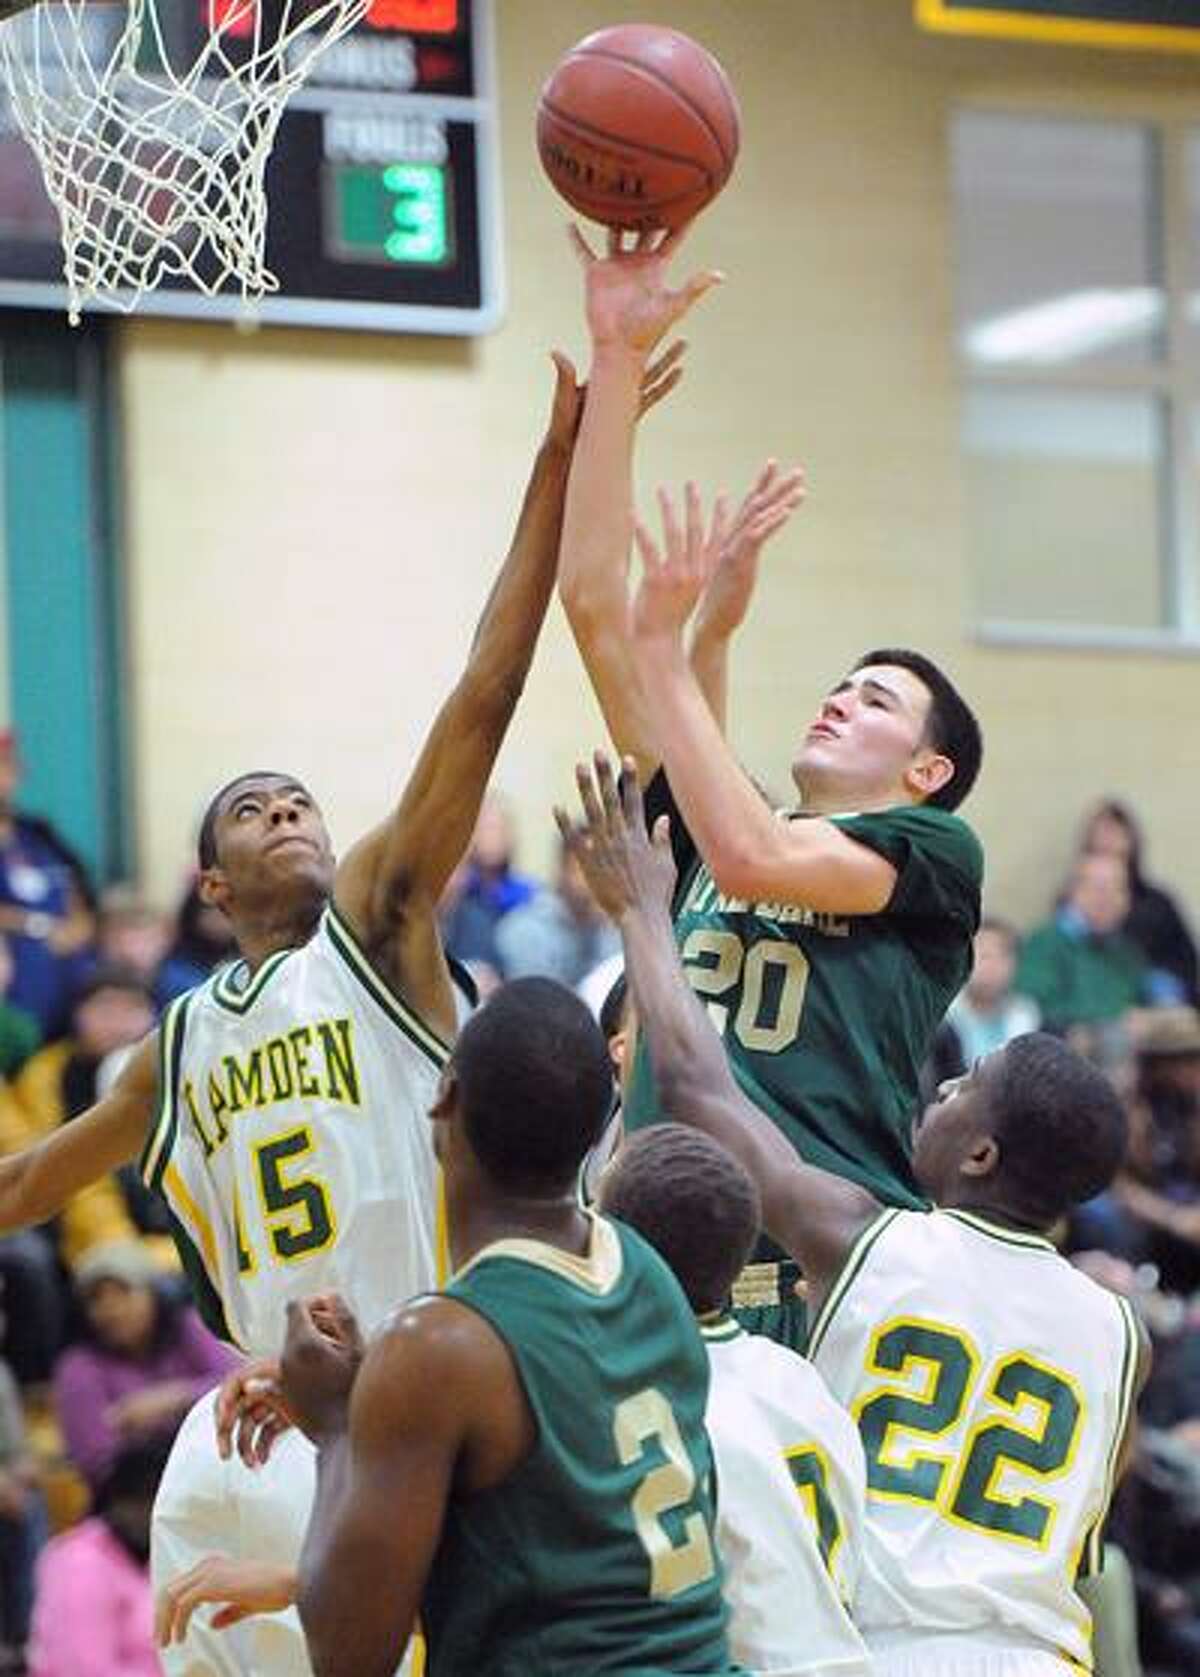 Hamden--Notre Dame's Tom Doyle puts up a shot as Hamden's Reggie Mayo defends during the first half. Photo by Peter Casolino/New Haven Register12/23/10 Cas101223